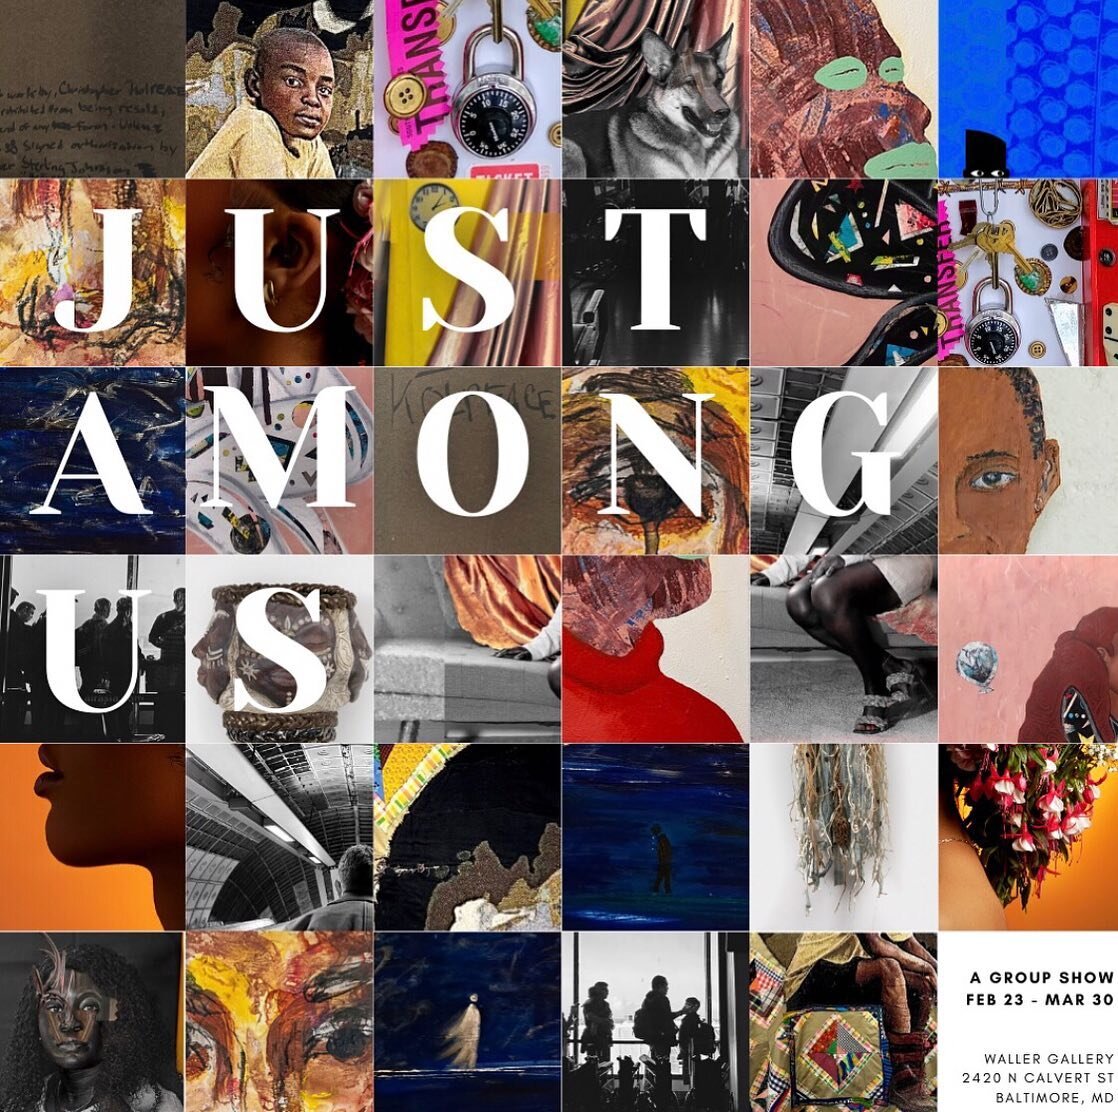 Super excited to share that Sister knows best will be in @wallergallery upcoming exhibition entitled &ldquo;Just Among Us&rdquo; Feb 23-March 23! Opening reception is this Friday 6-8PM. 

Step into a world where the boundaries of intimacy, friendship